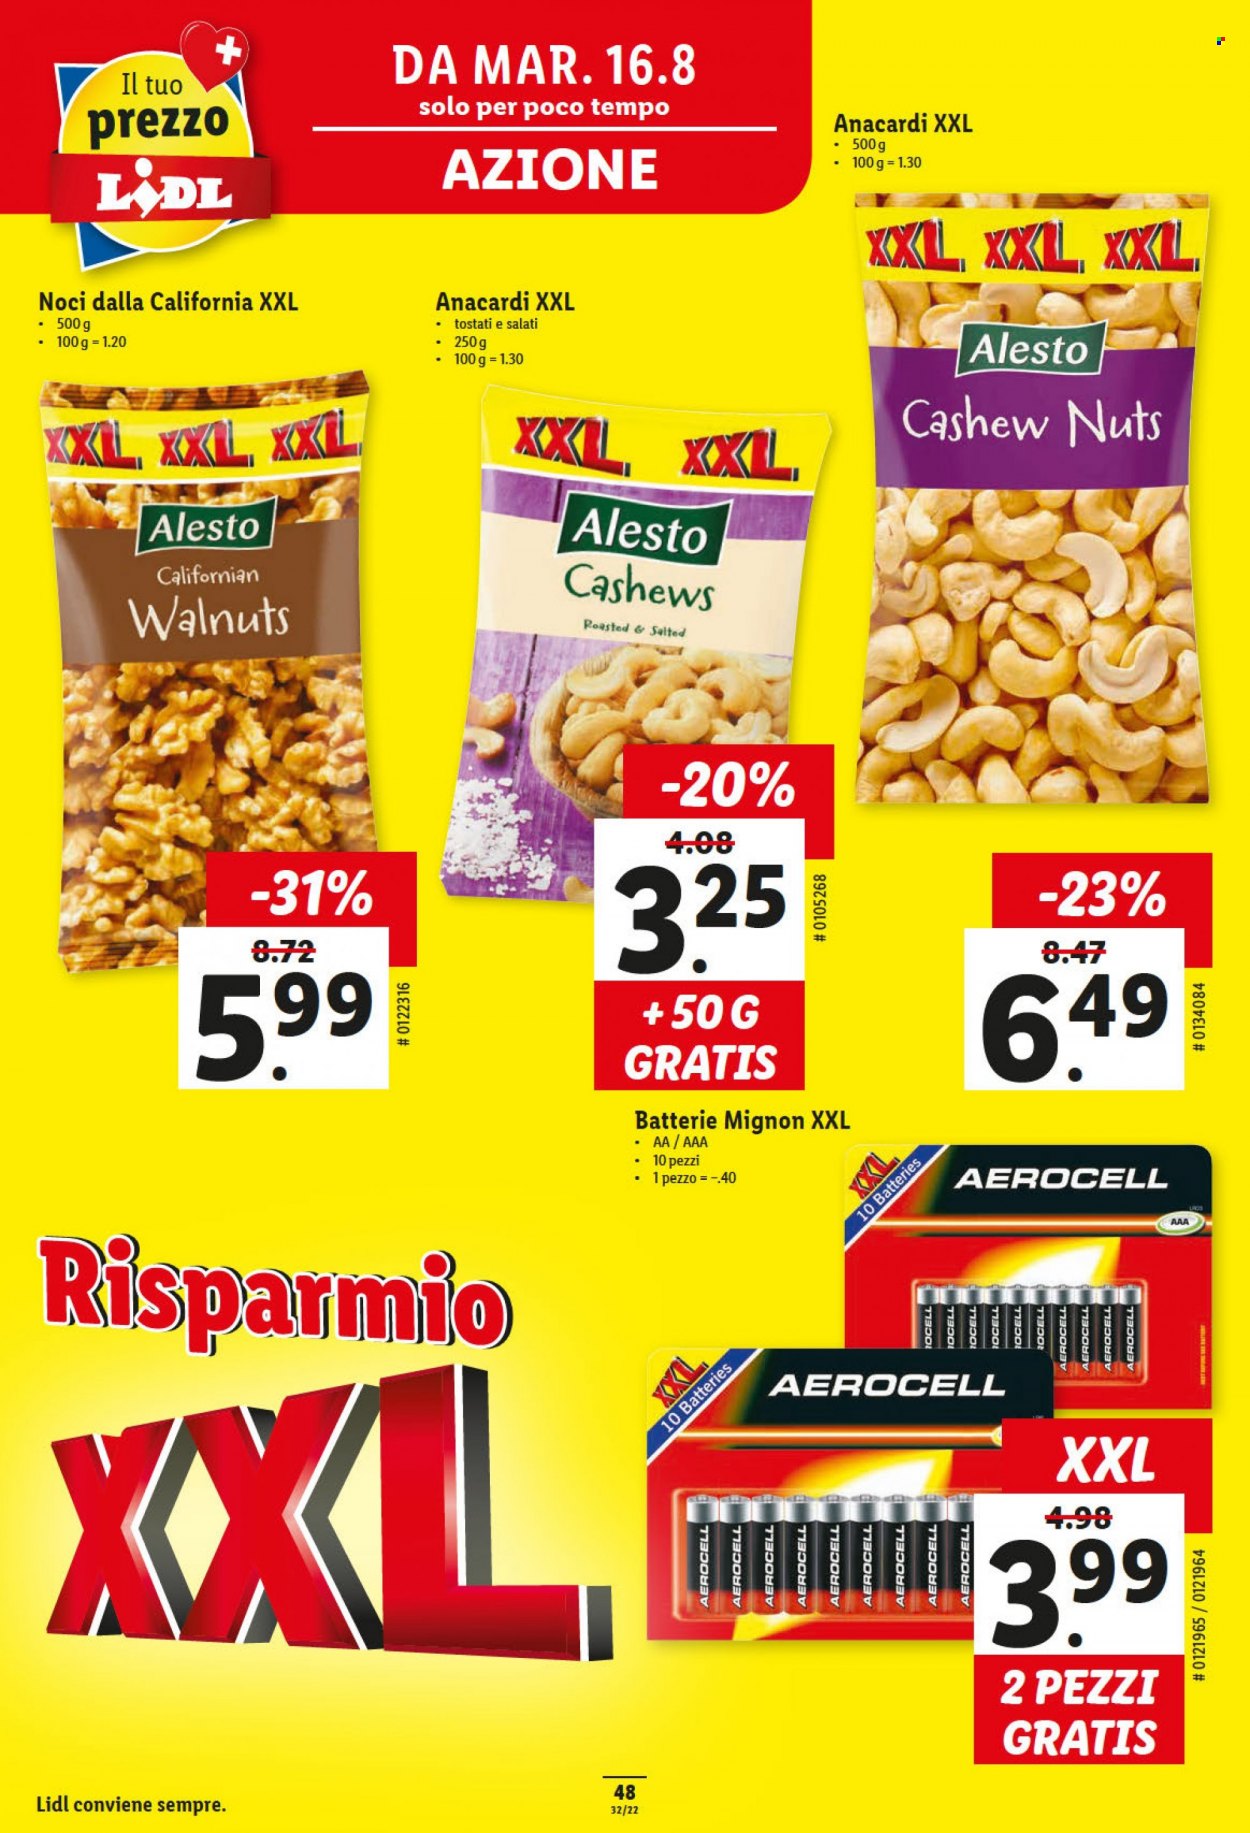 Catalogue Lidl - 11.8.2022 - 17.8.2022. Page 48.